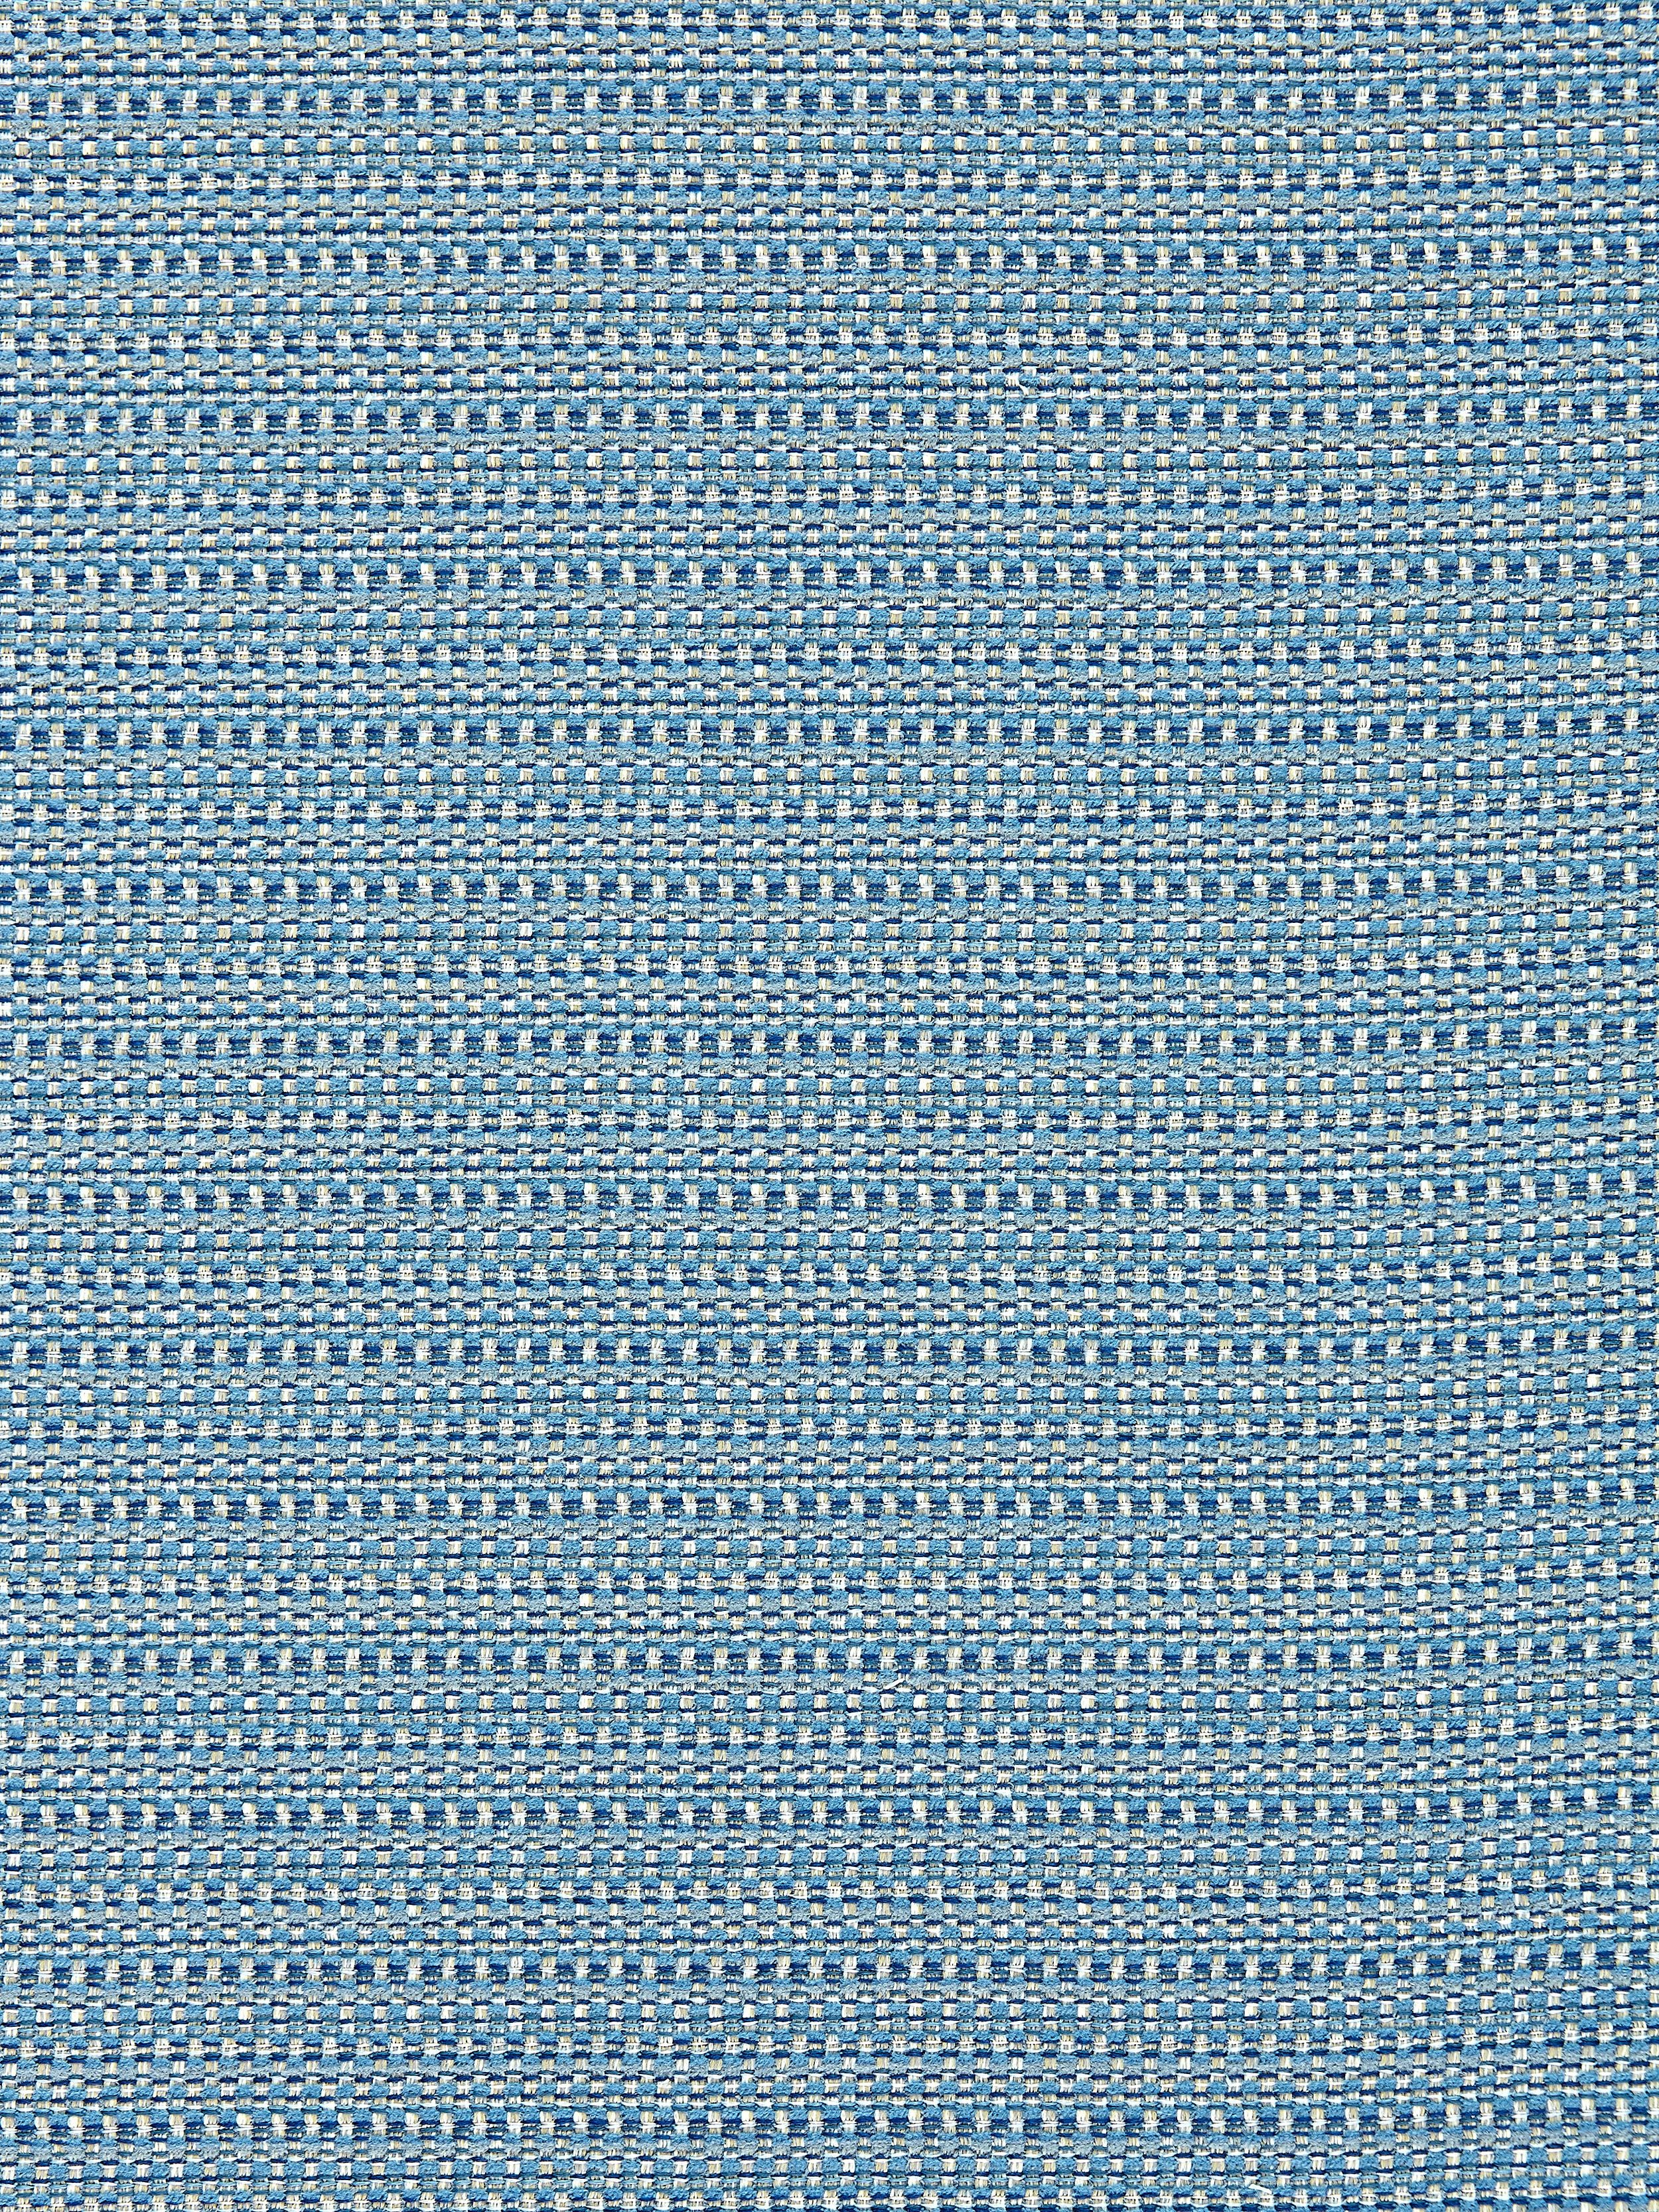 Summer Tweed fabric in denim color - pattern number SC 000327061 - by Scalamandre in the Scalamandre Fabrics Book 1 collection